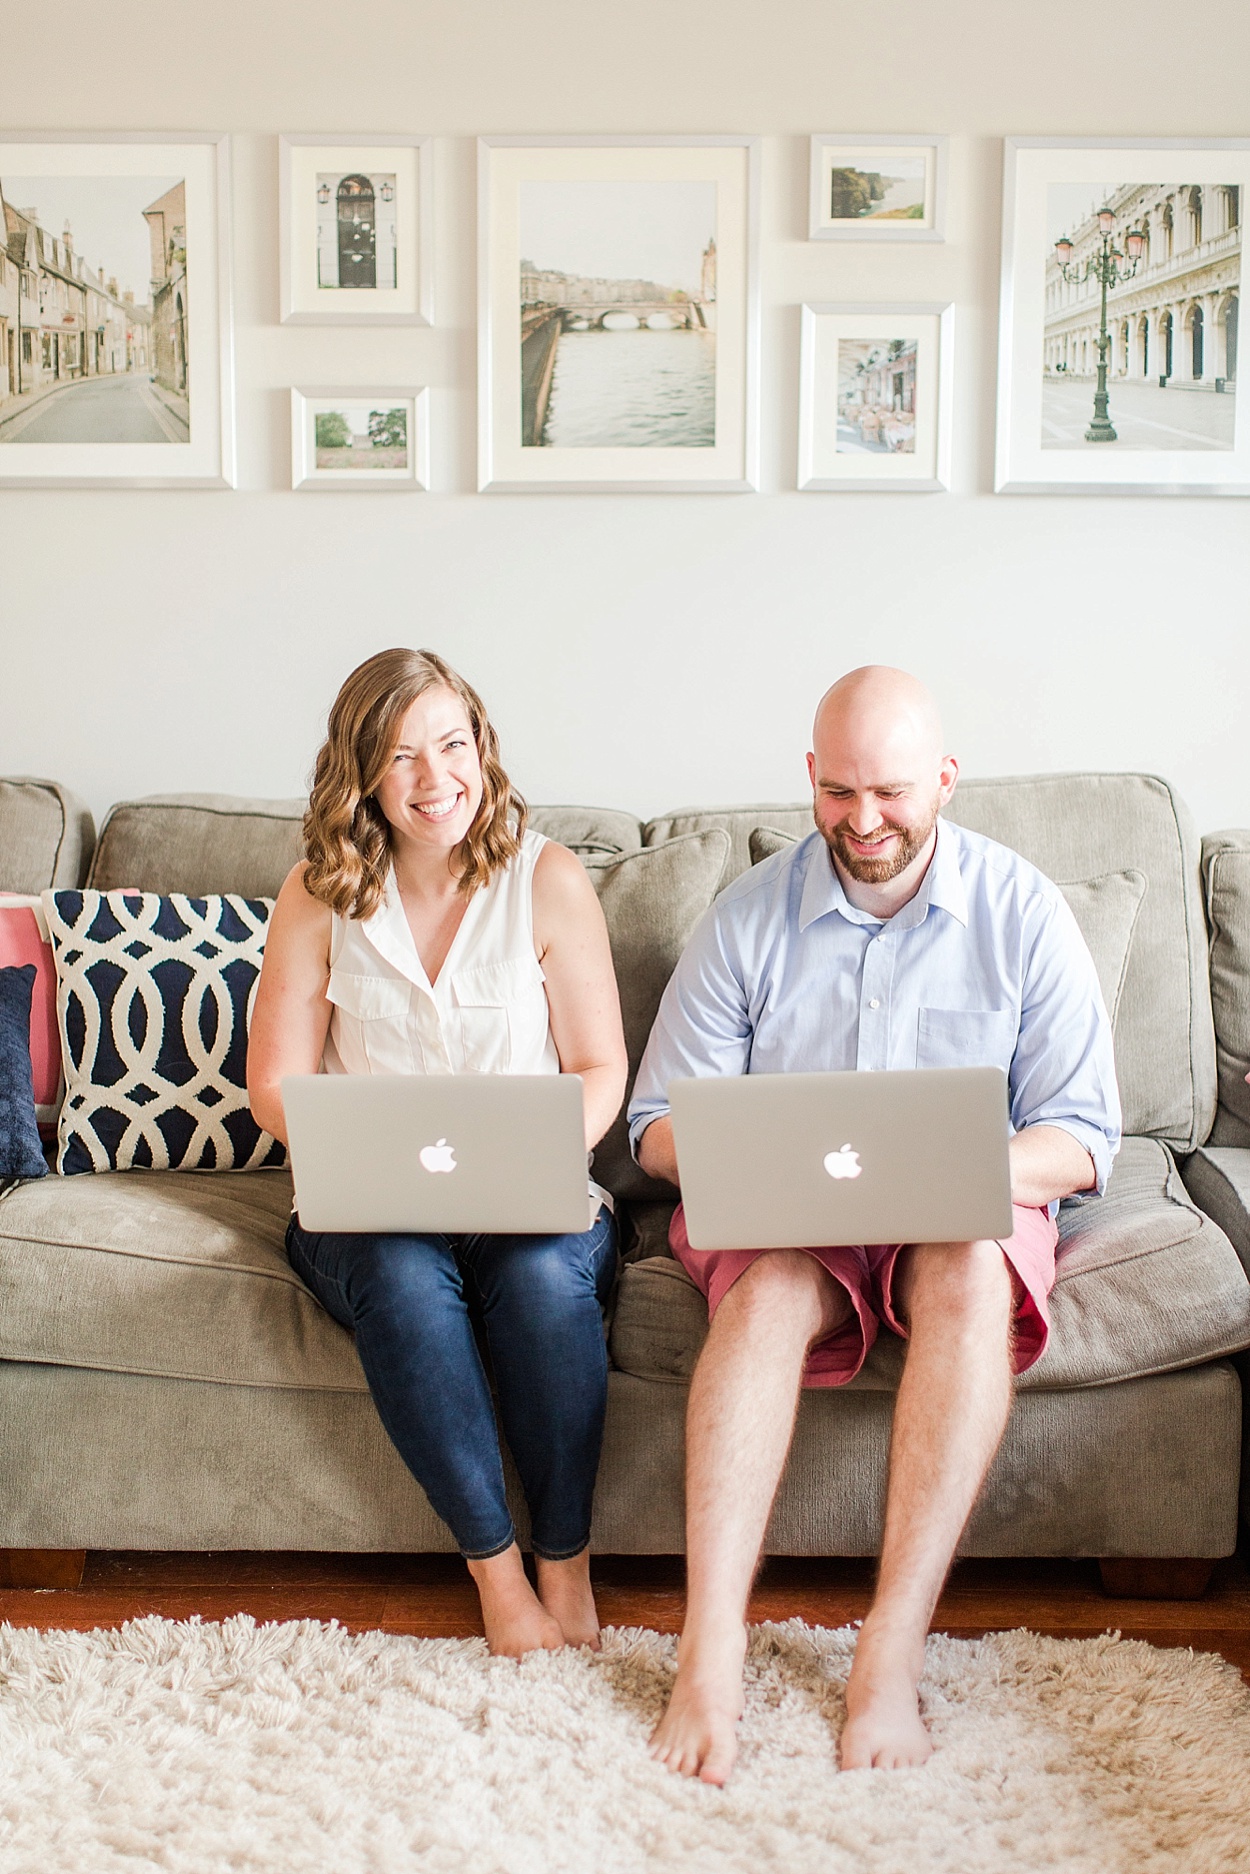 Emailing Like A Boss webinar by Abby Grace | Photo by Kaitlyn Phipps